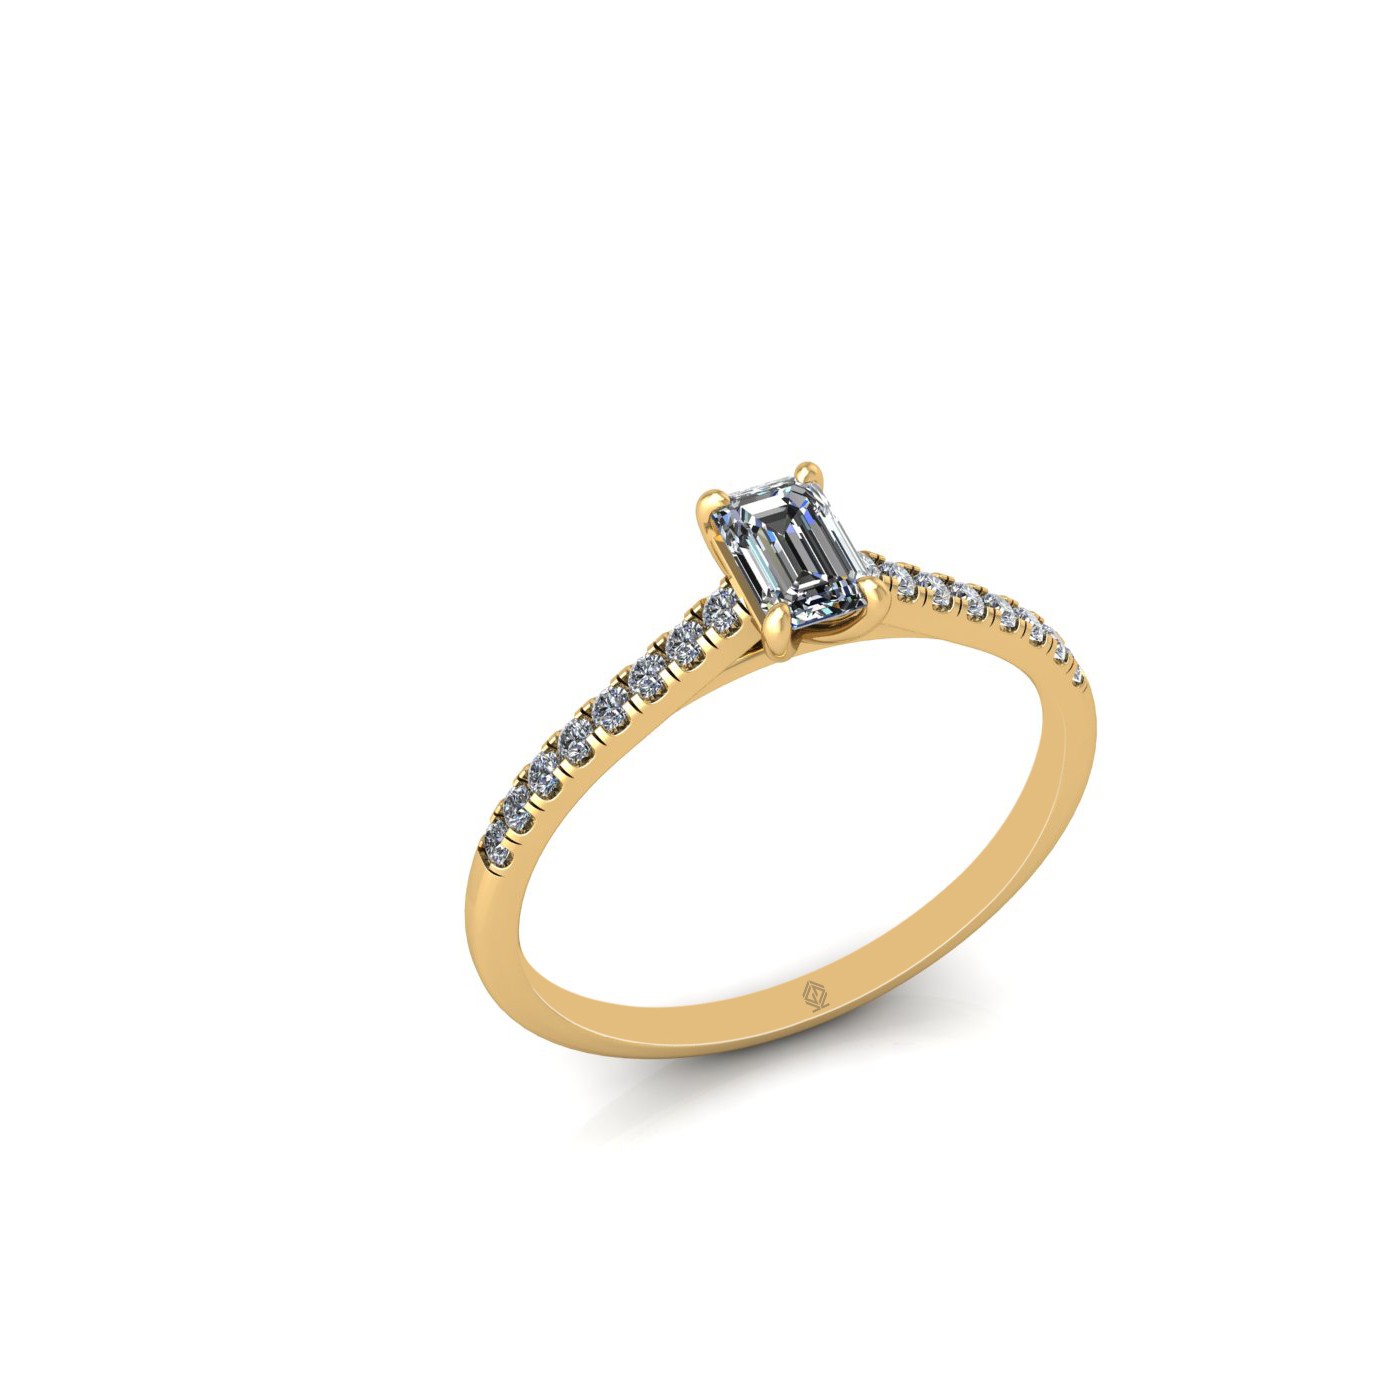 18k yellow gold 0,30 ct 4 prongs emerald cut diamond engagement ring with whisper thin pavÉ set band